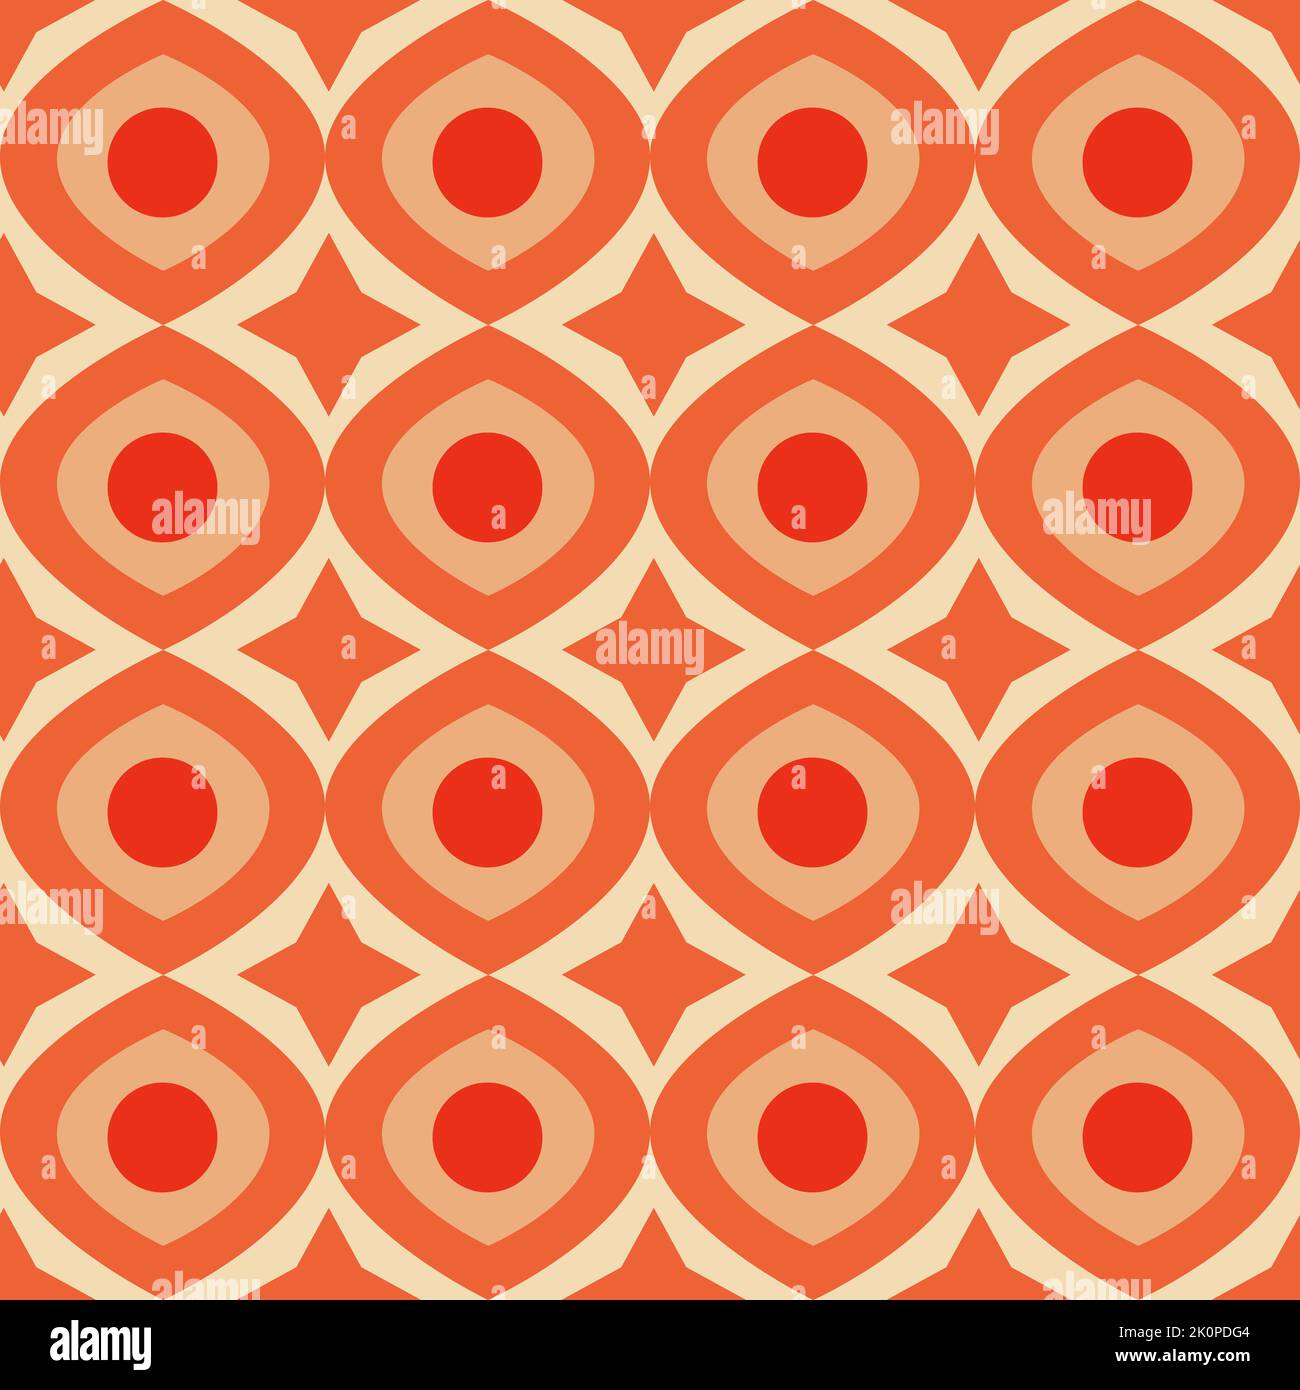 Vintage retro geometric pattern in the style of the 70s and 60s. Stock Vector